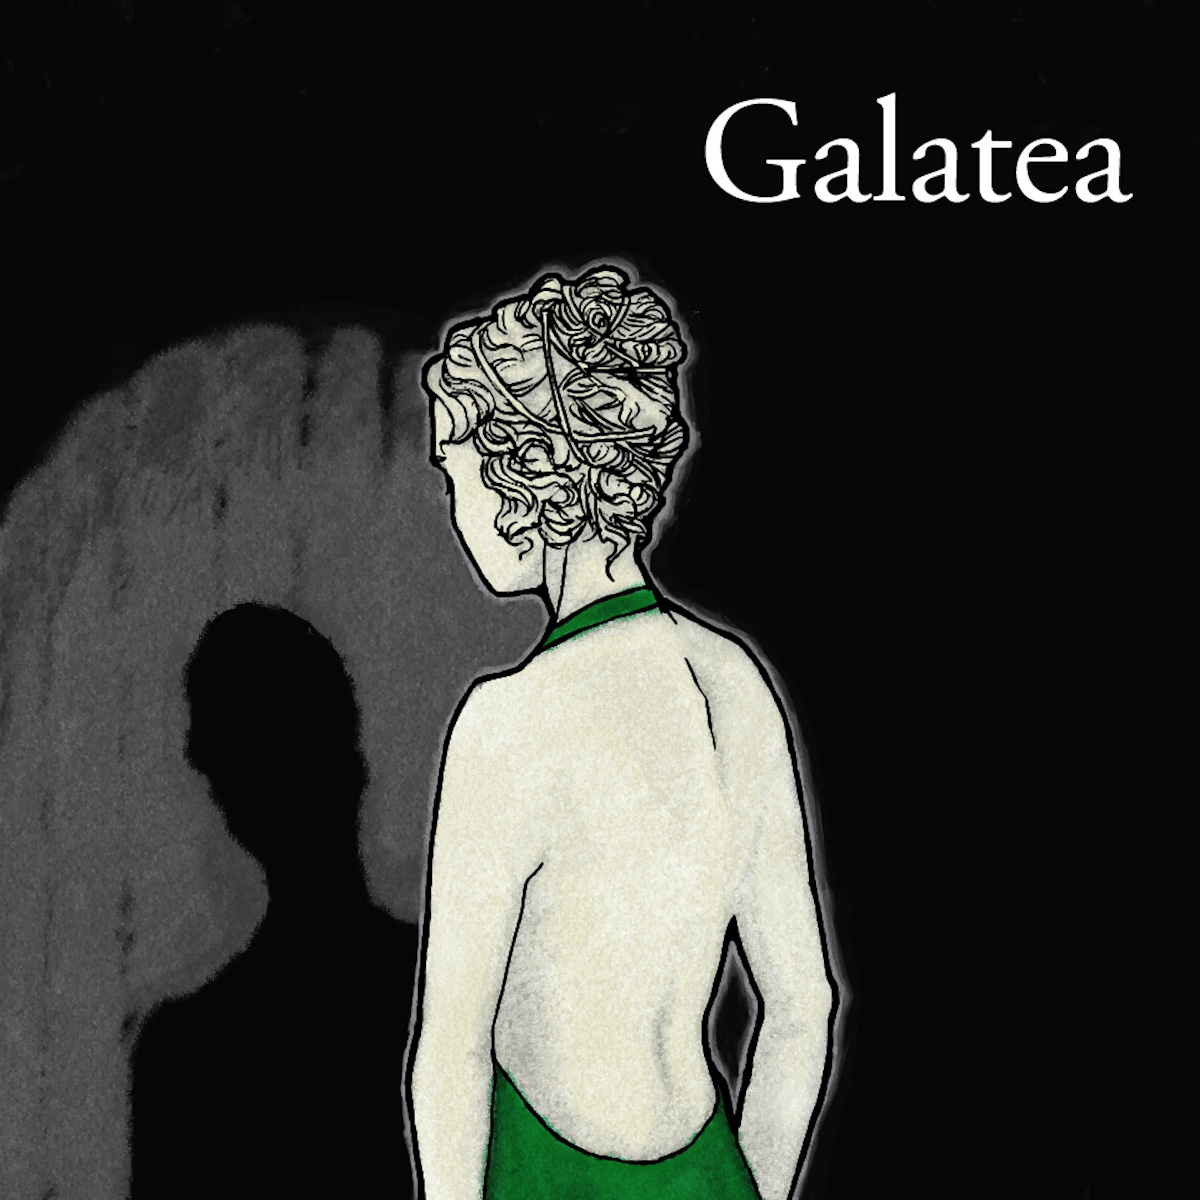 A woman wearing a green dress has her back turned to is. She stands in a spotlight surrounded by darkness. In the top right is the text "Galatea" in white serif font.